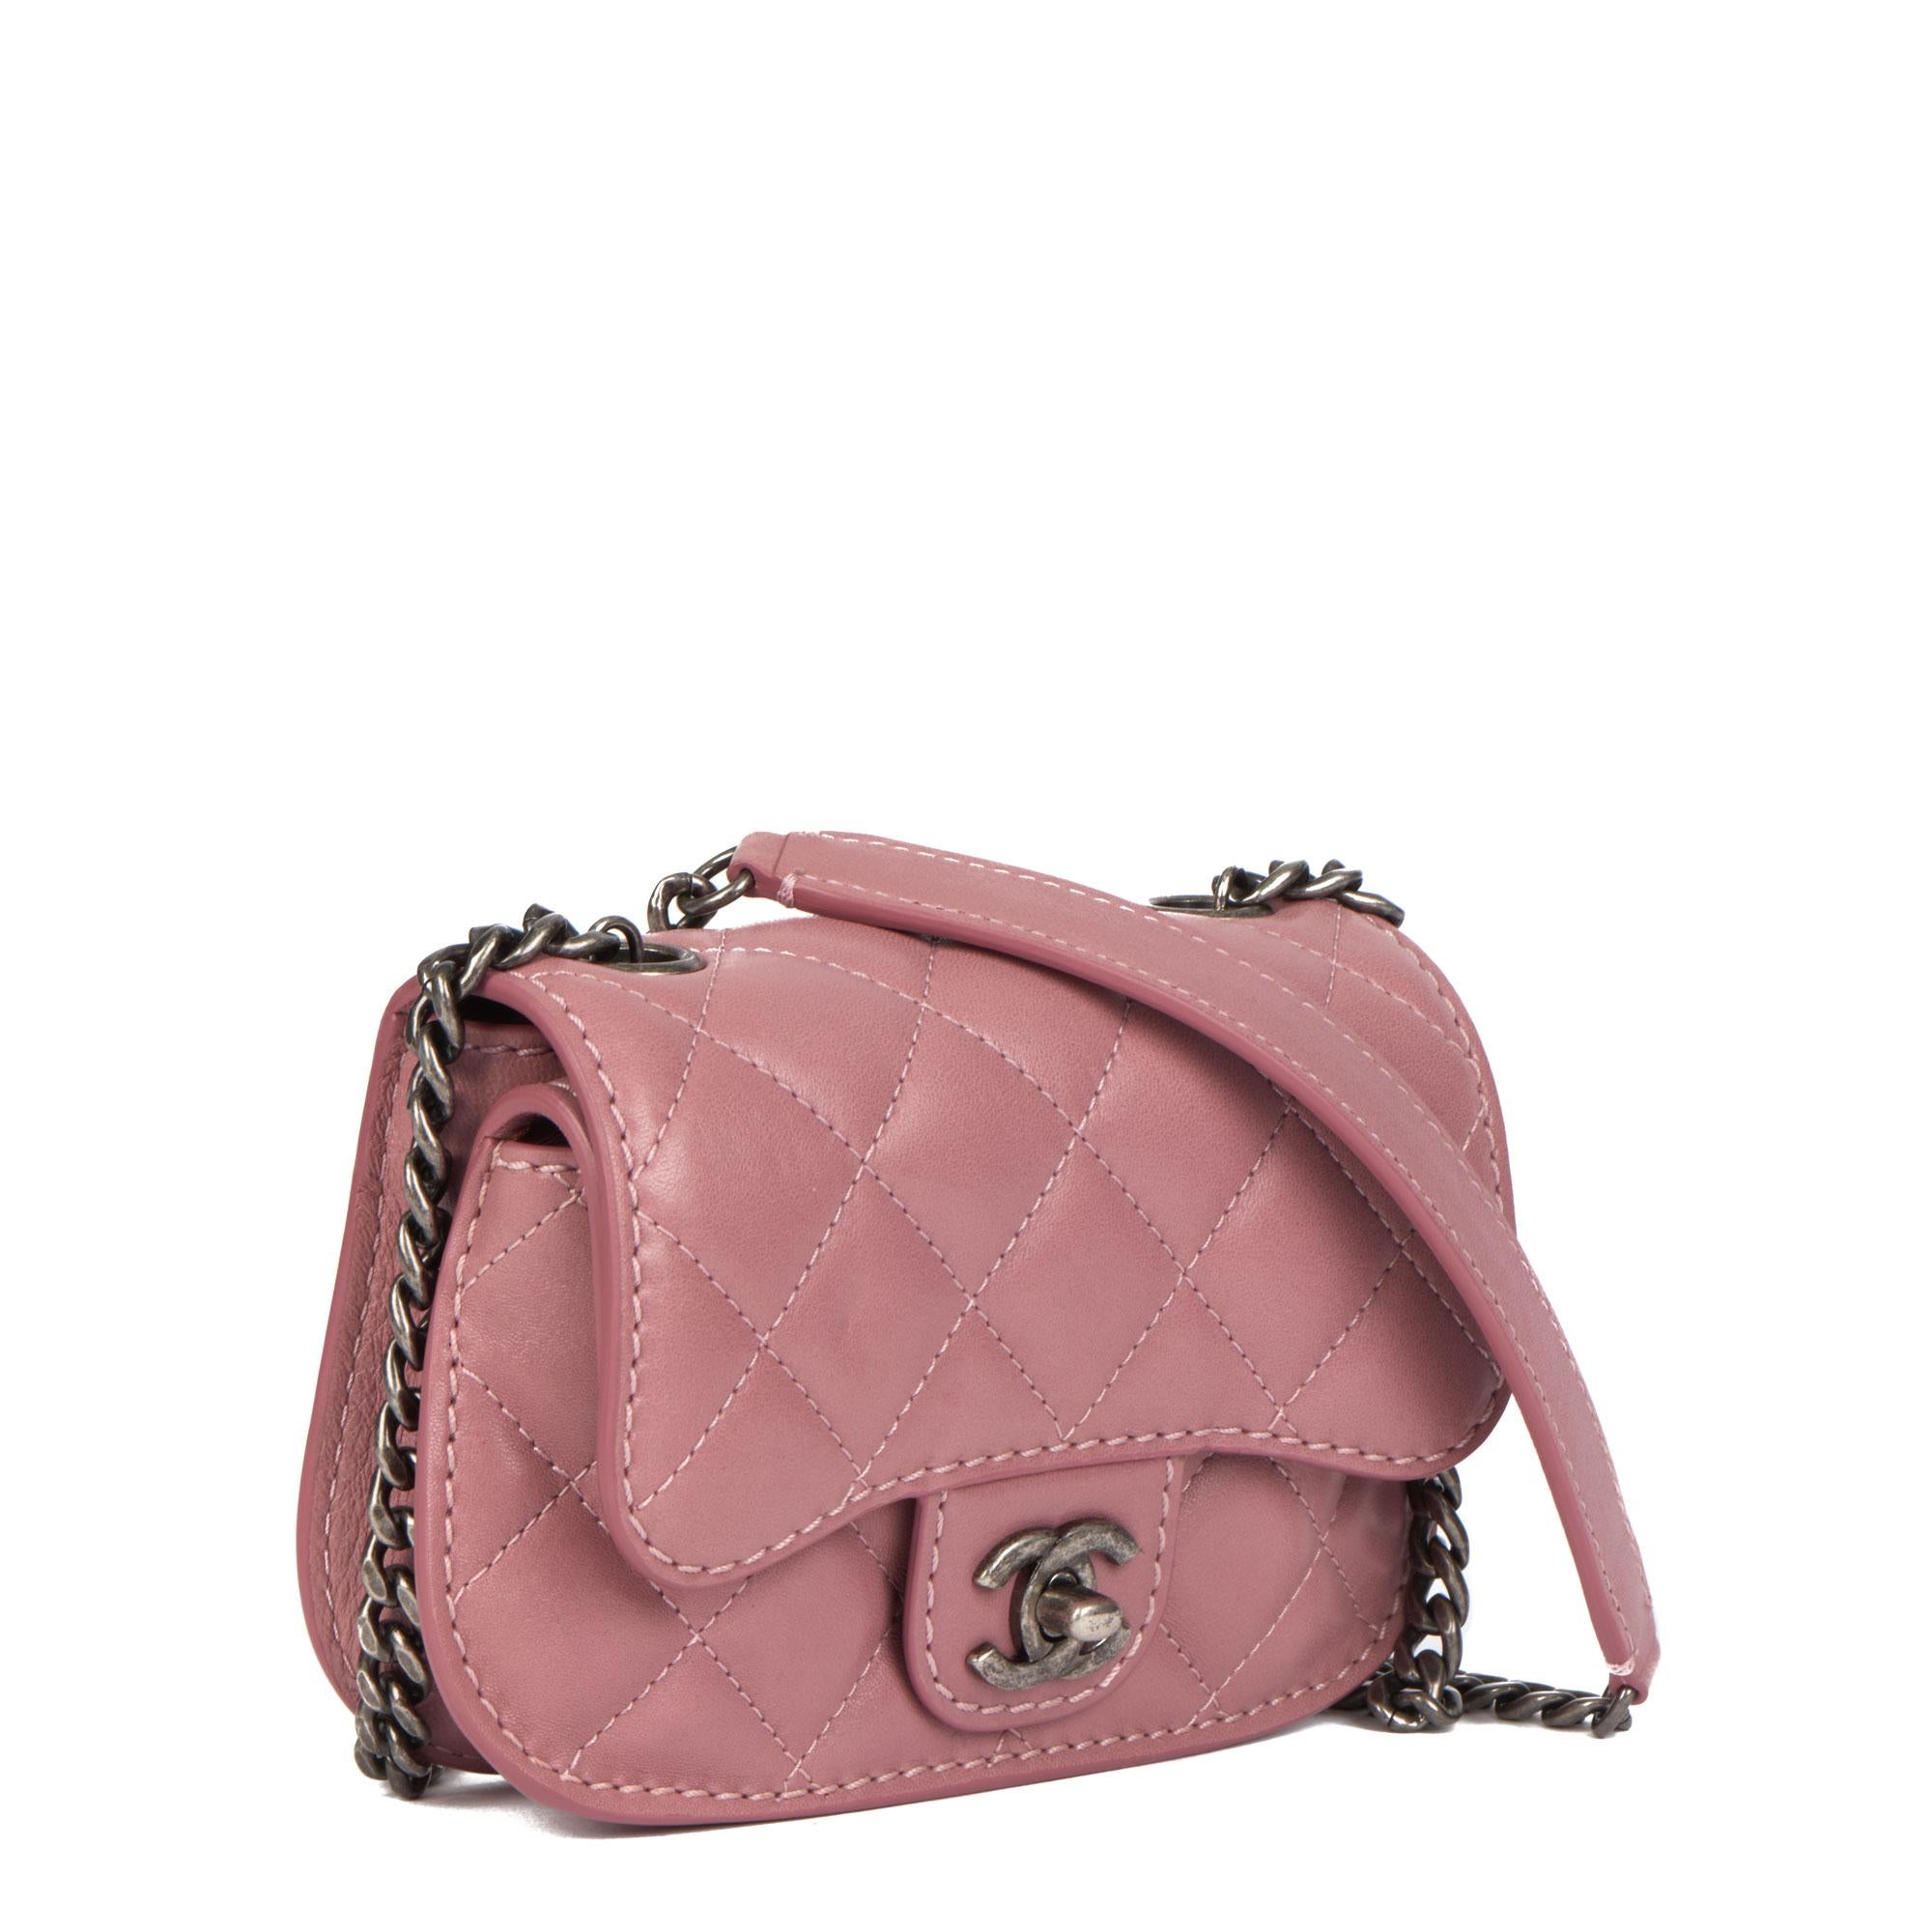 Chanel MAUVE QUILTED LAMBSKIN MINI FLAP BAG

CONDITION NOTES
The exterior is in excellent condition with minimal signs of use.
The interior is in excellent condition with minimal signs of use.
The hardware is in excellent condition with light signs